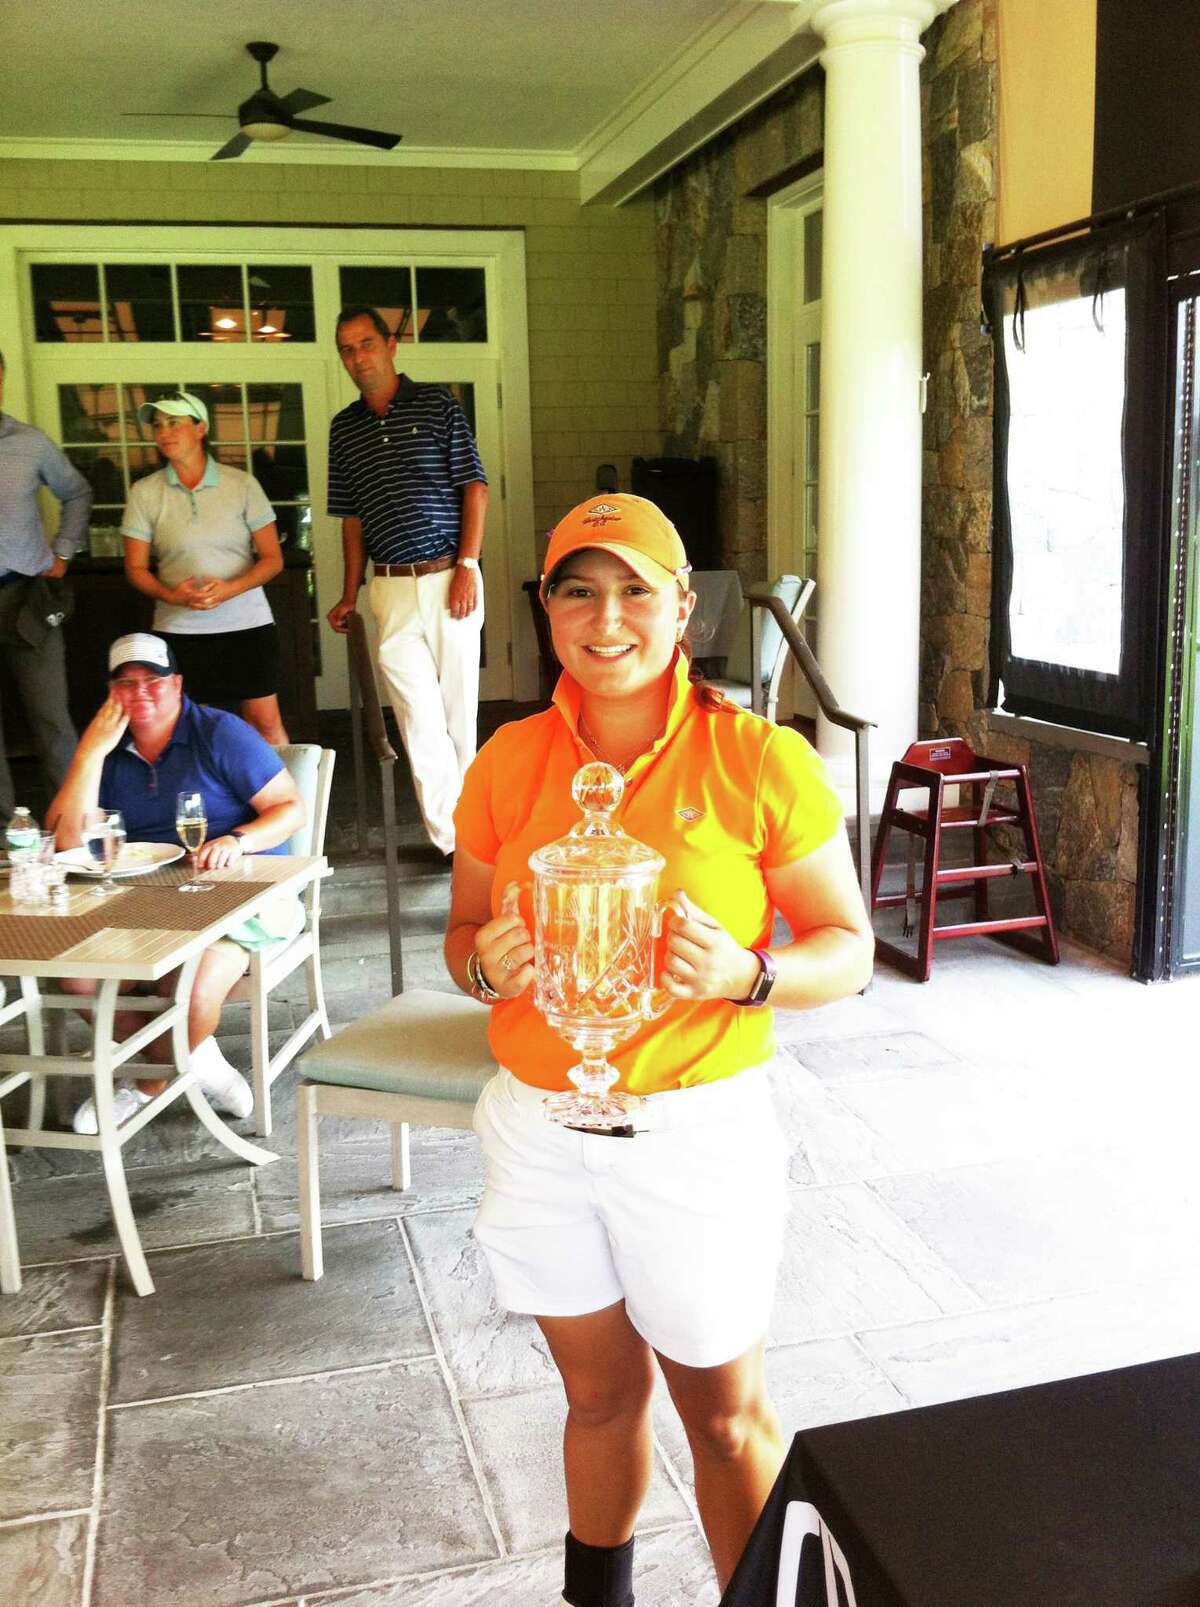 McDaid wins Womens Met Open Championship for second straight year hq photo